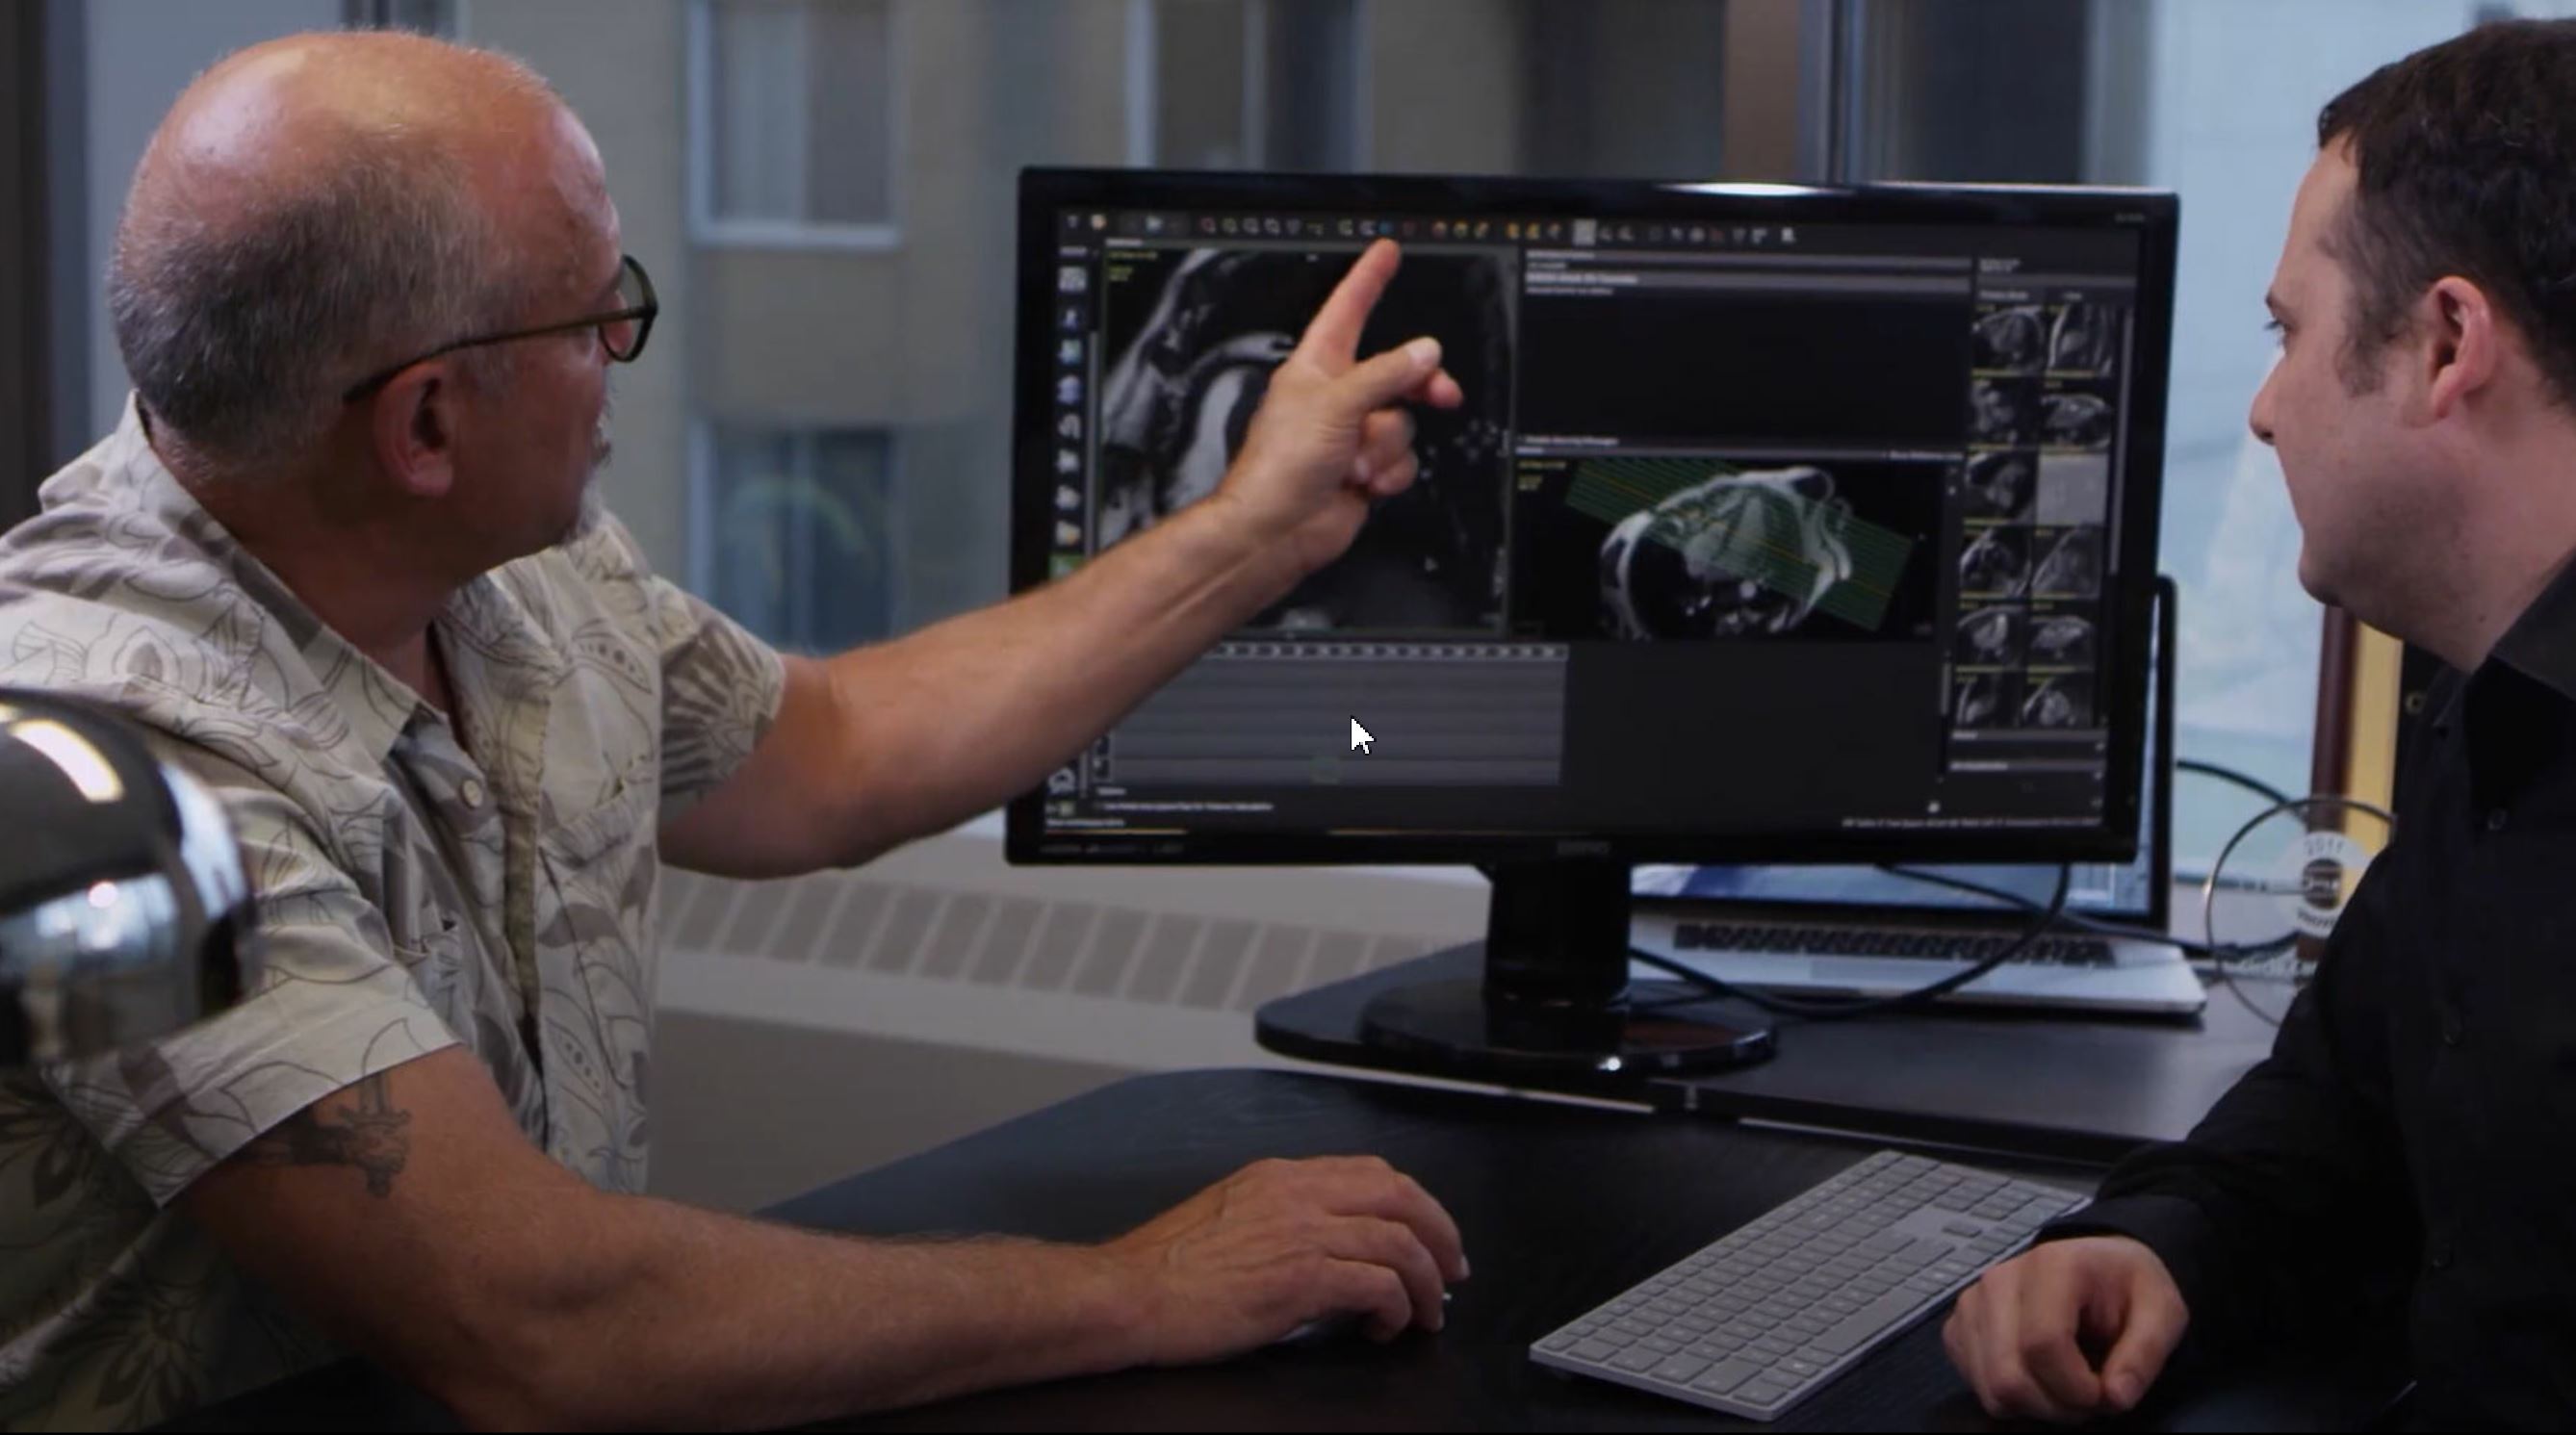 Two men view a digital scan of a heart on a monitor between them.